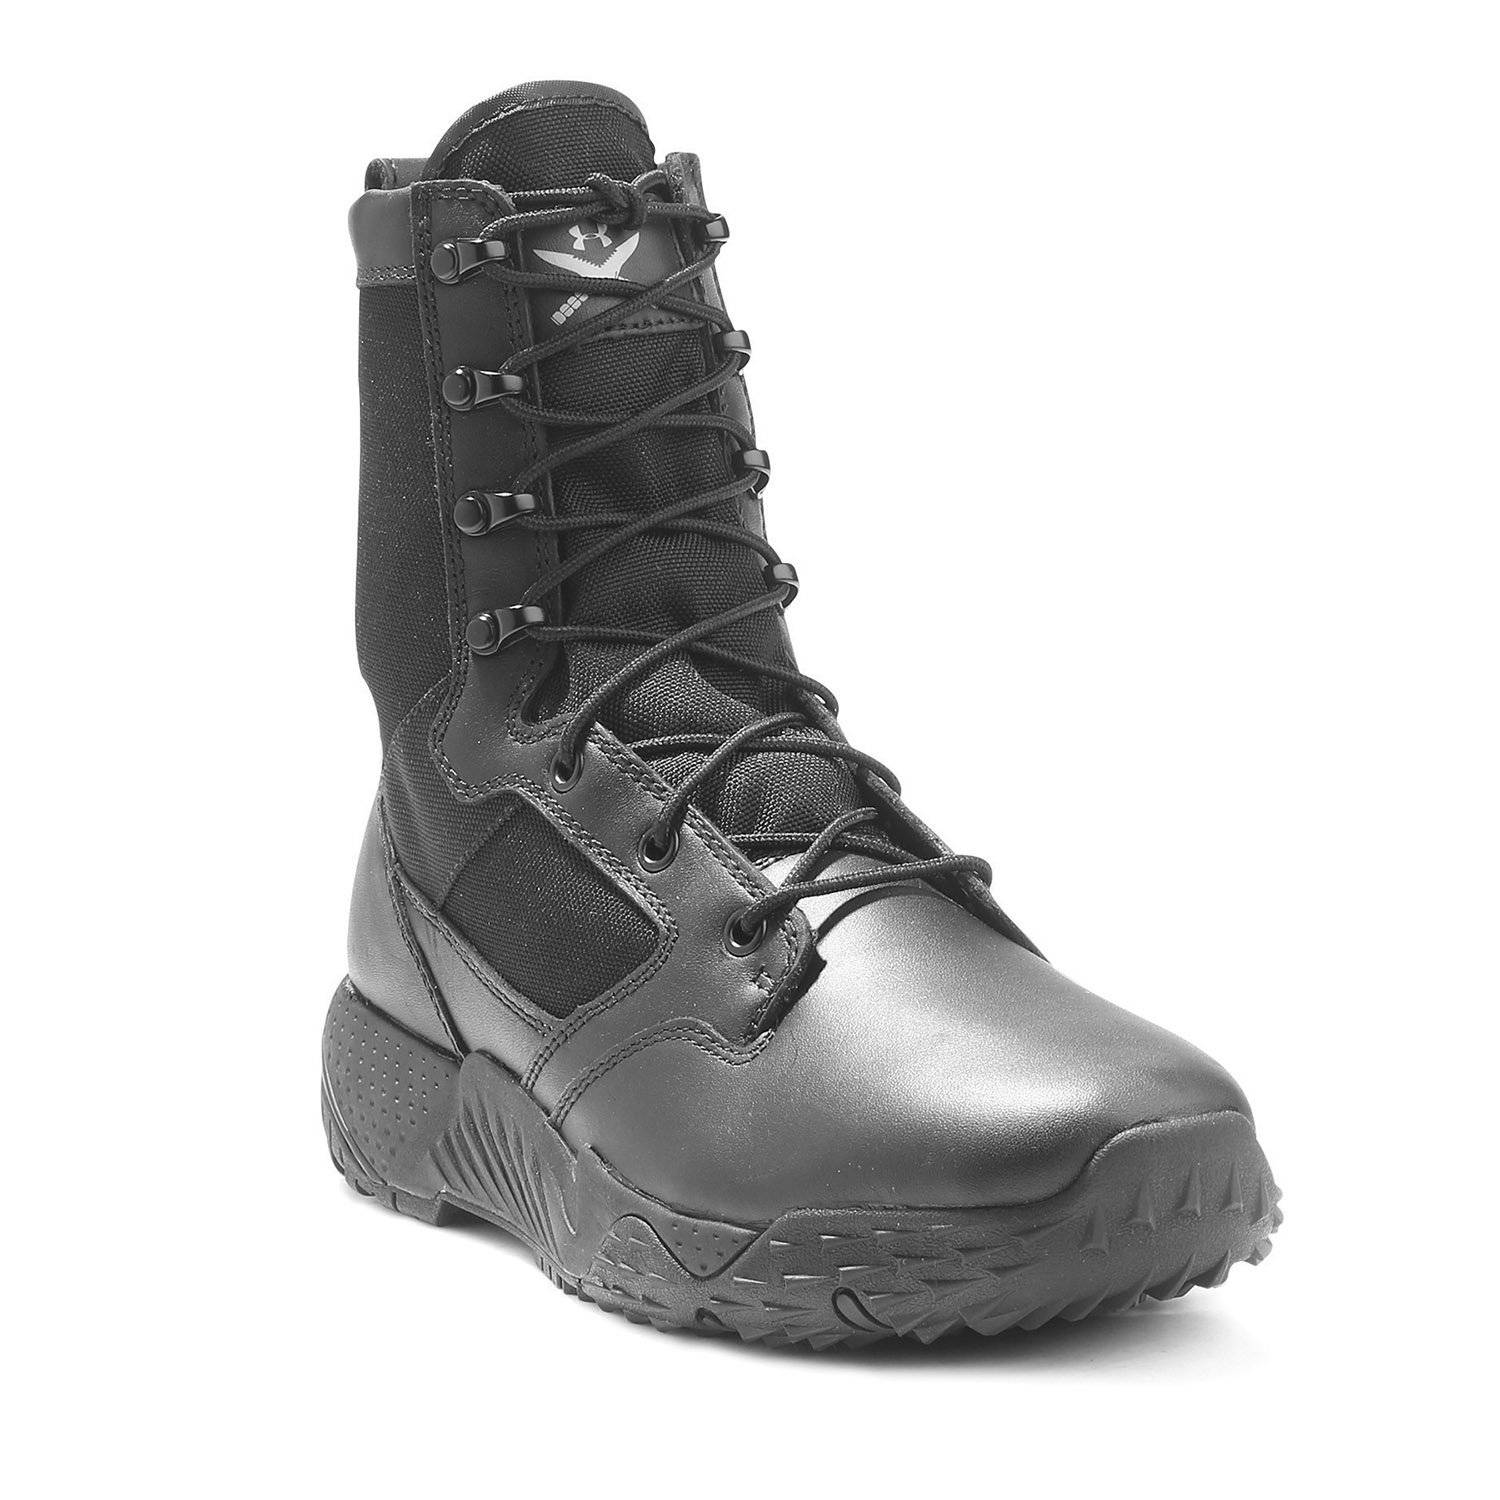 under armour men's jungle rat military and tactical boot